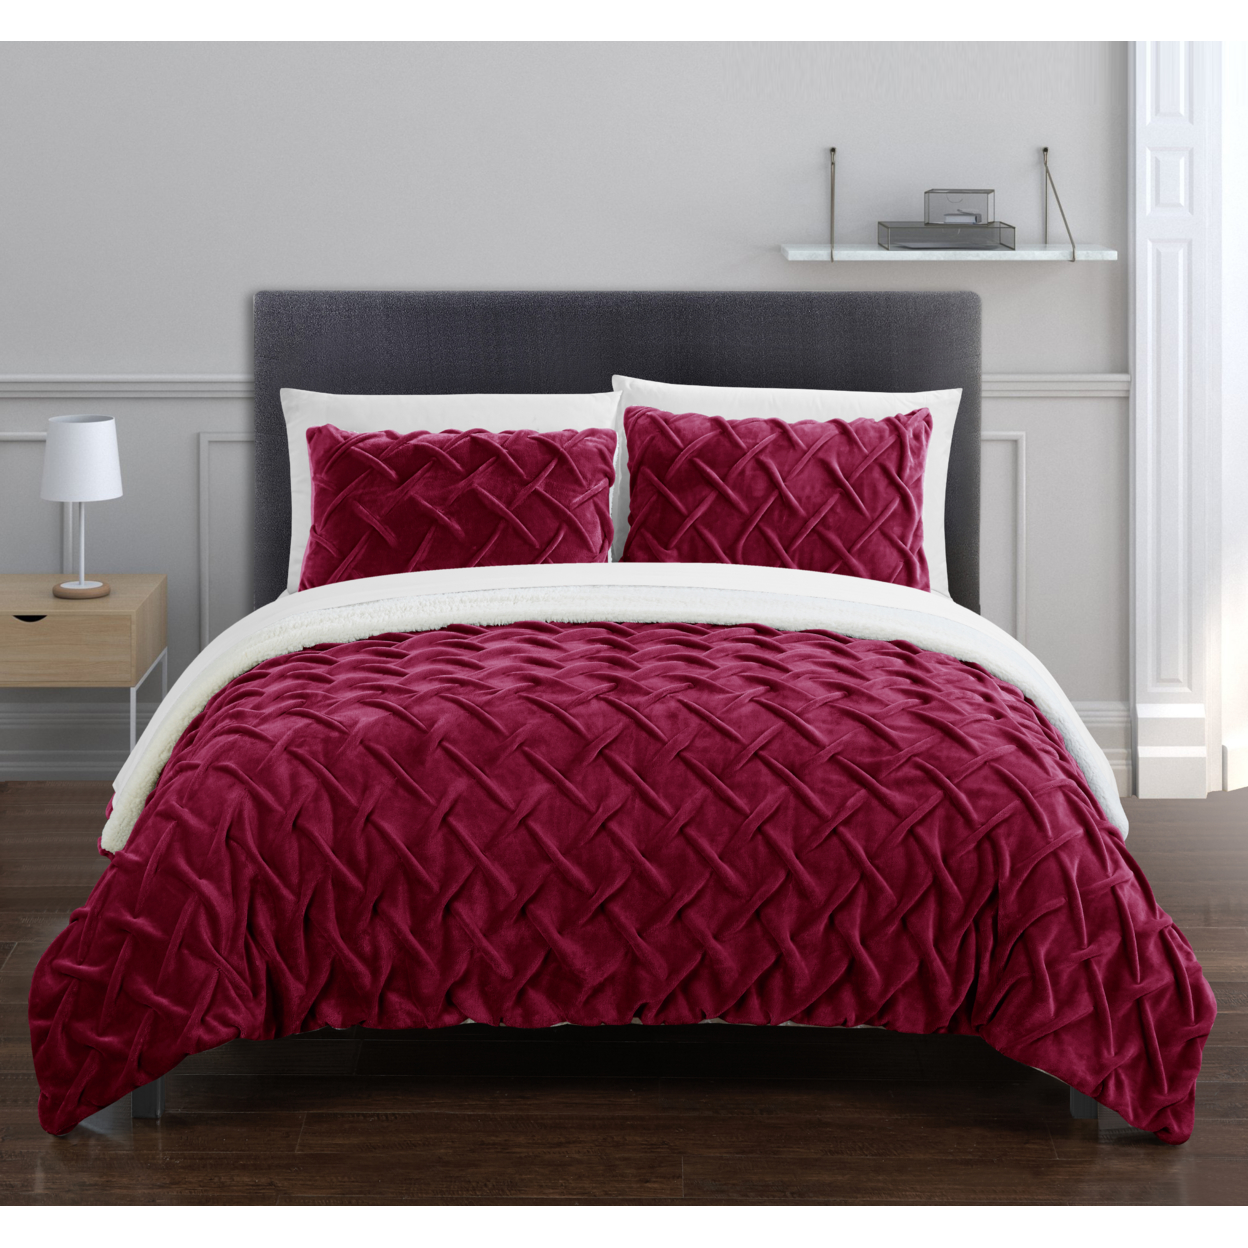 Thirsa 3 Or 2 Piece Comforter Set Ultra Plush Micro Mink Criss Cross Pinch Pleat Sherpa Lined Bedding - Red, Queen